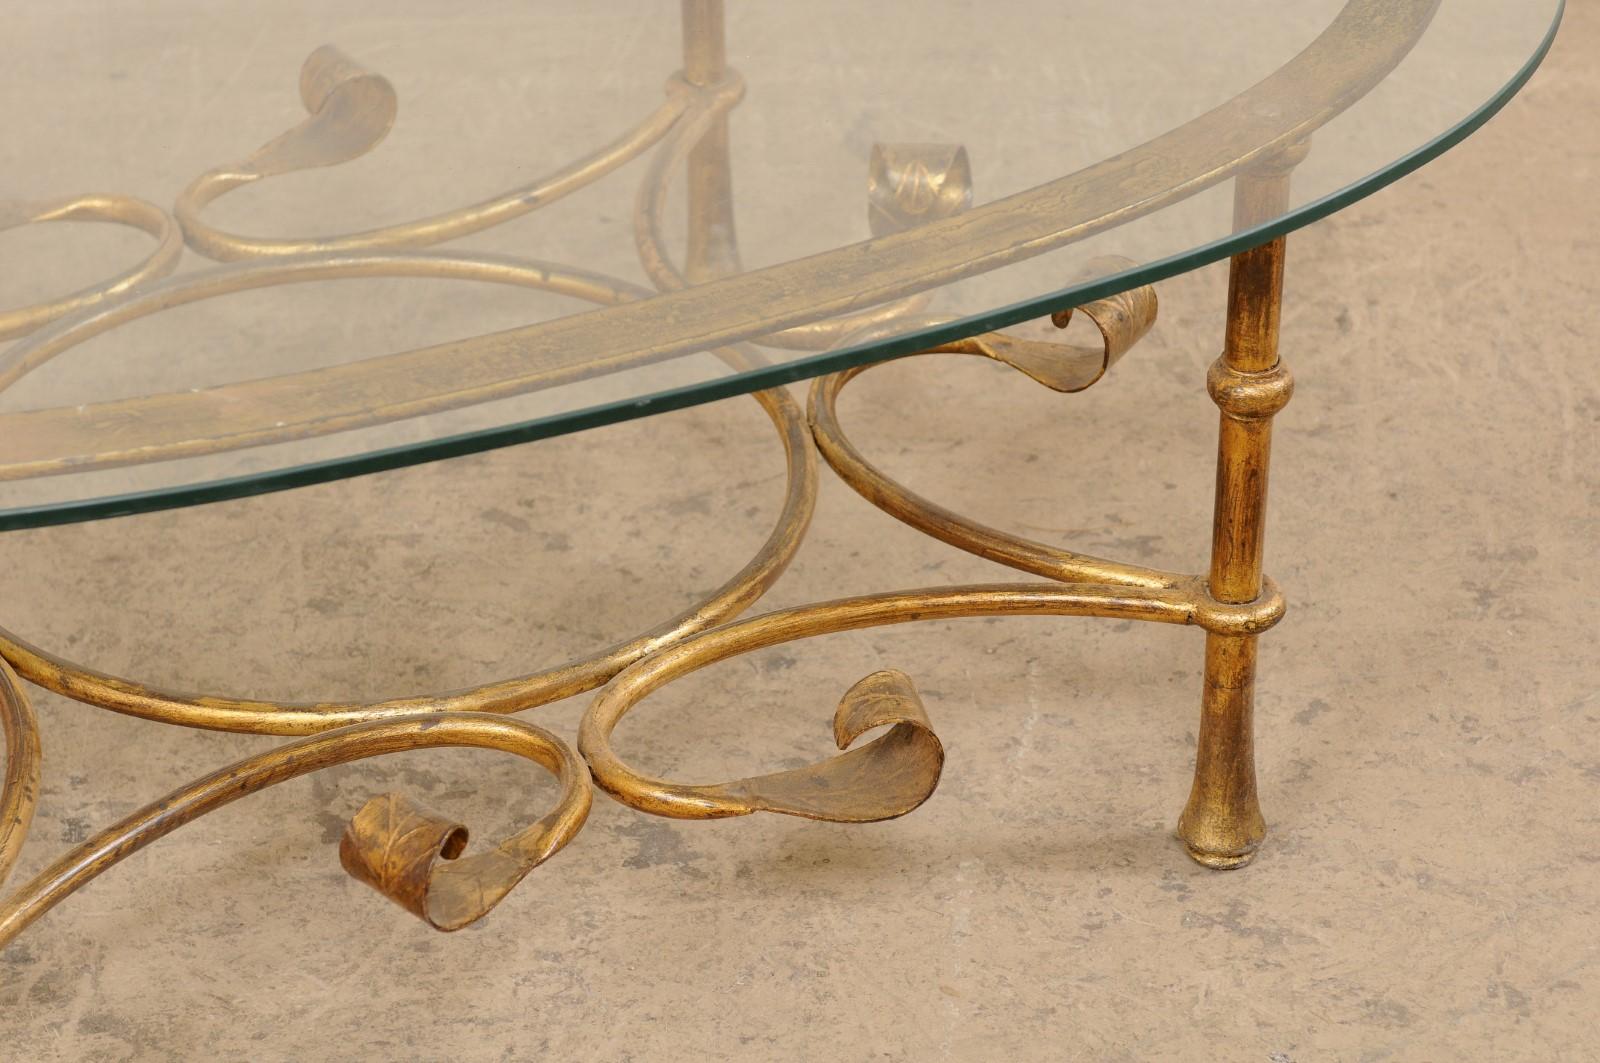 20th Century Spanish Oval Glass-Top Table with Iron Base (Gold Finish), Mid 20th C.